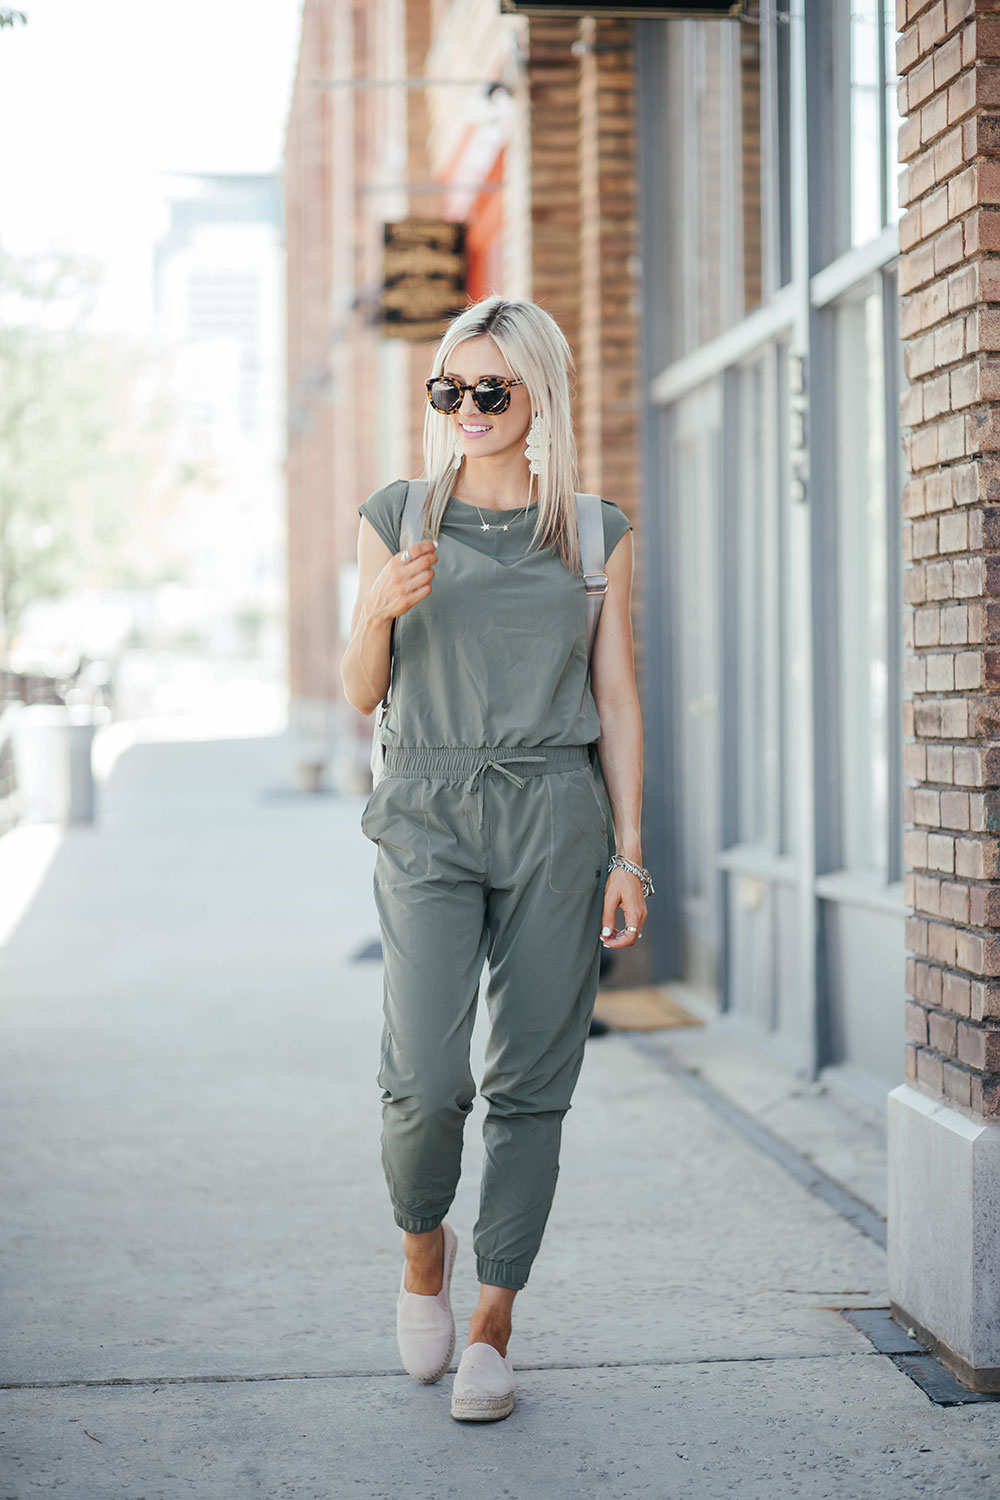 How to wear a jumpsuit 4 ways | summer outfit ideas | stylish mom outfits | how to style a diaper bag | Little Miss Fearless